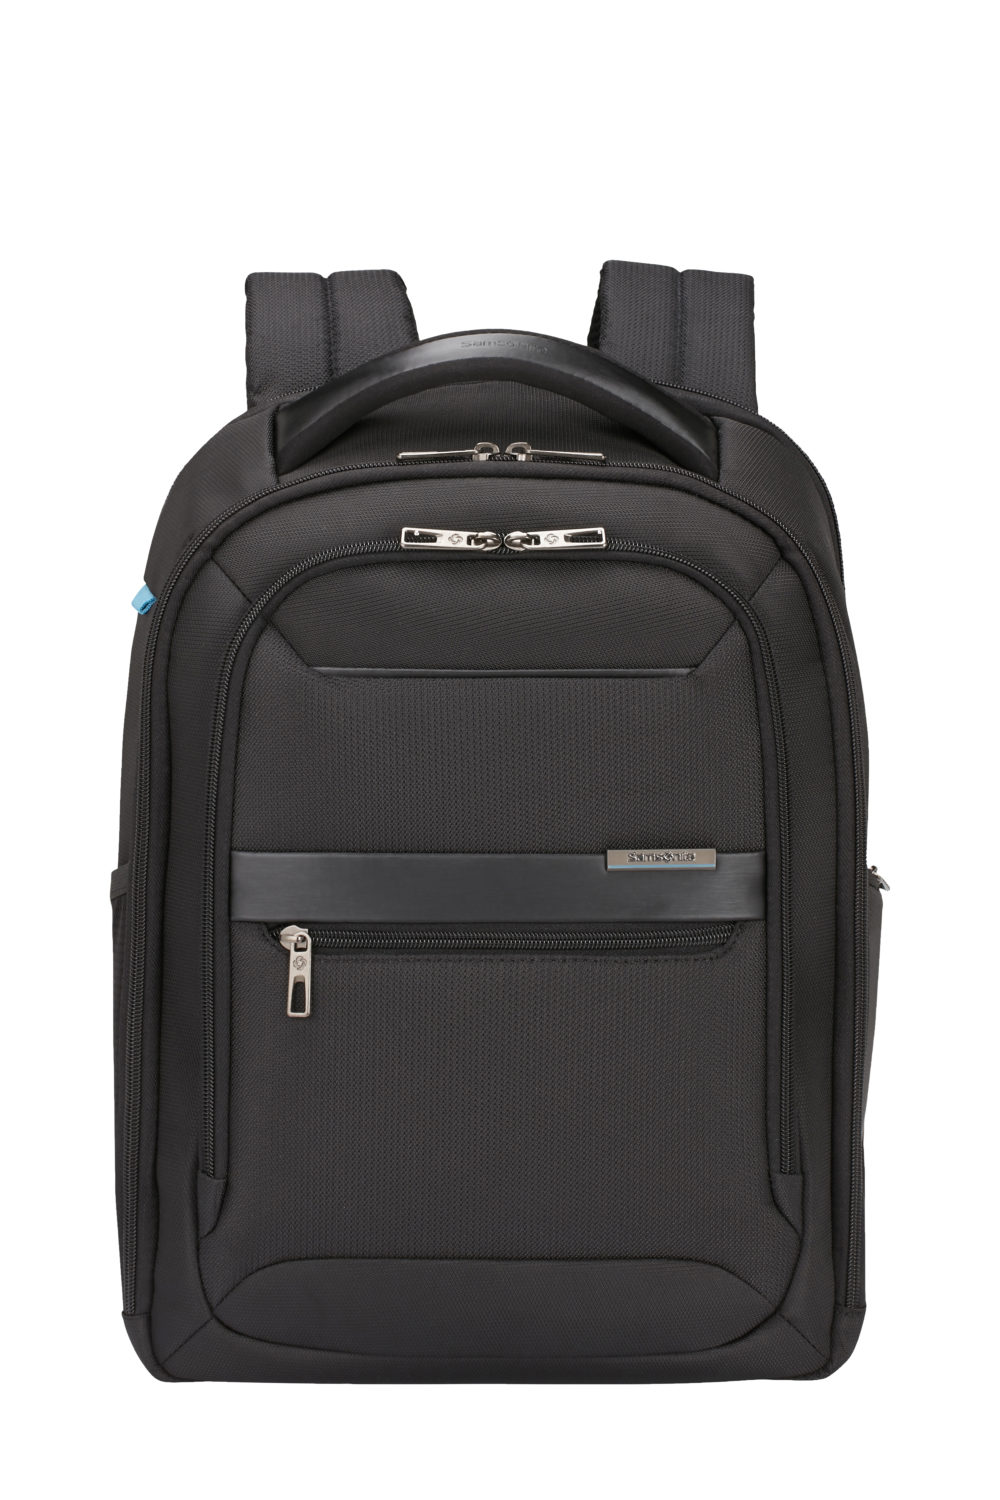 VECTURA EVO LAPT.BACKPACK 14.1